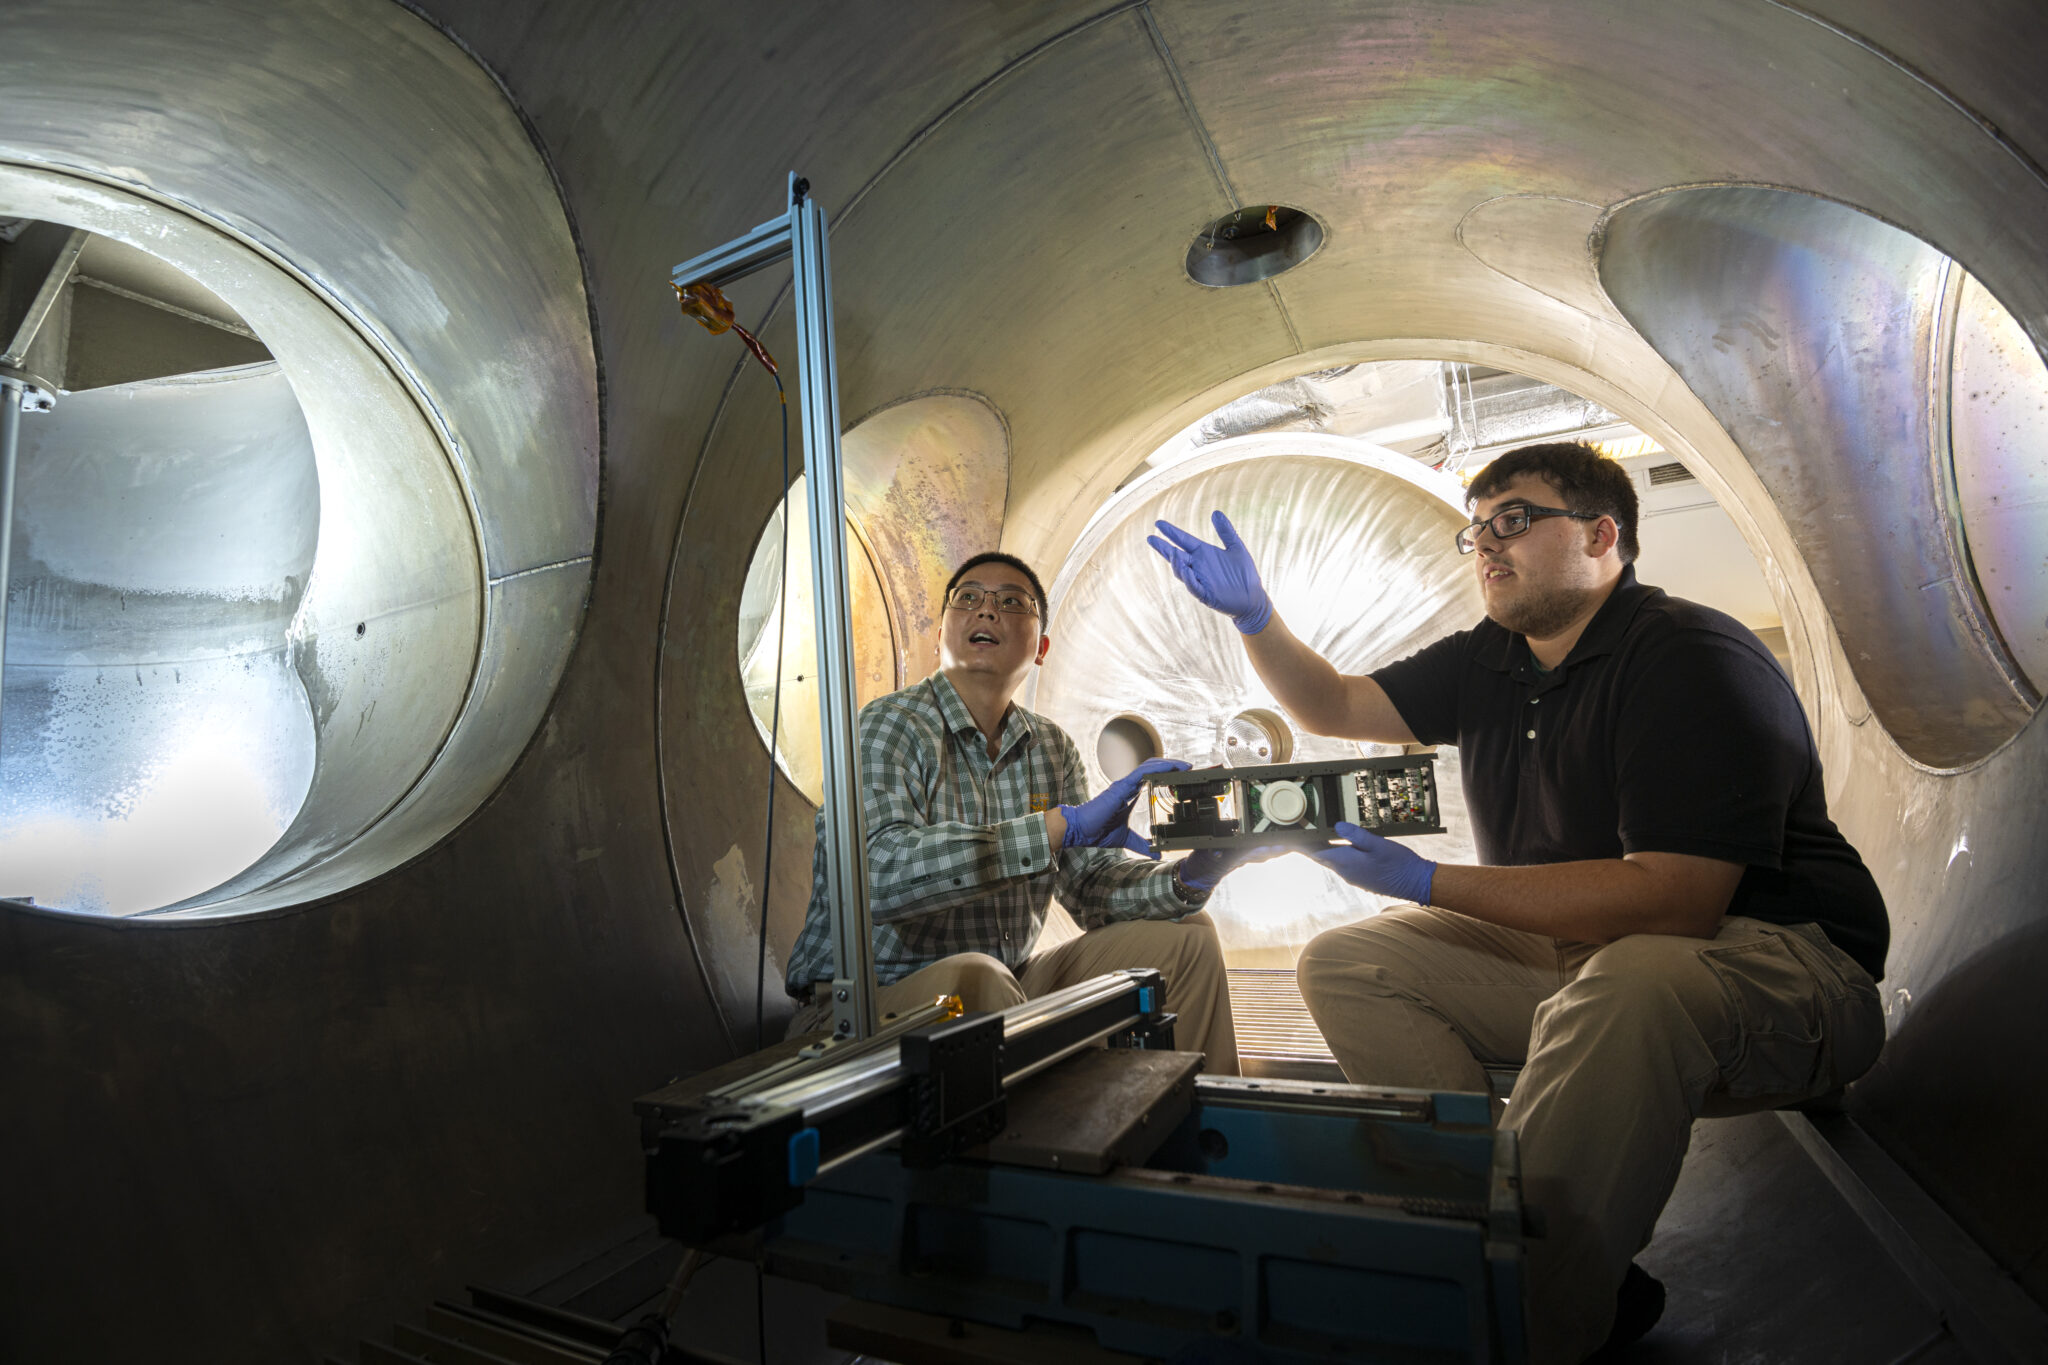 Dr. Daoru Han, left, and Jacob Ortega discuss engineering techniques inside a plasma vacuum chamber. Han and Ortega are working with a group of undergraduate researchers on a NASA challenge. Photo by Michael Pierce/Missouri S&T.